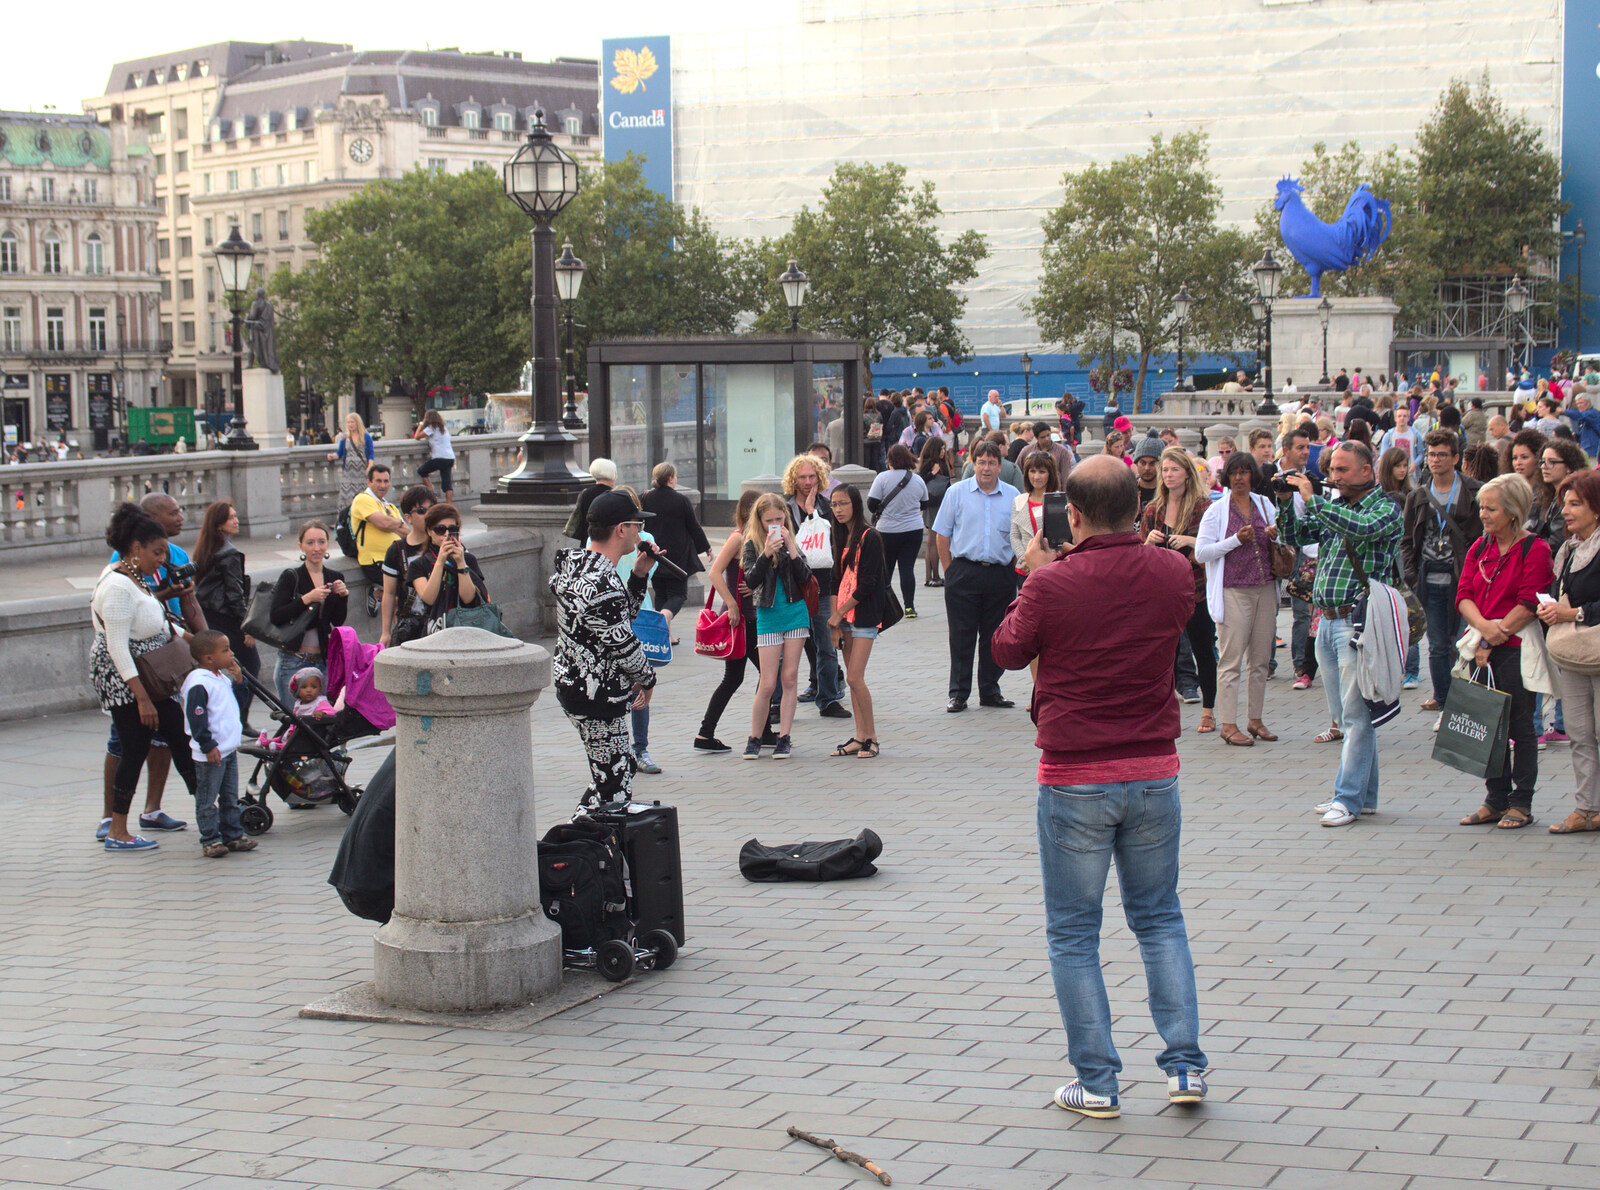 A beatboxer does his thing as tourists look on from SwiftKey Innovation Day, and Pizza Pub, Westminster and Southwark - 14th August 2014